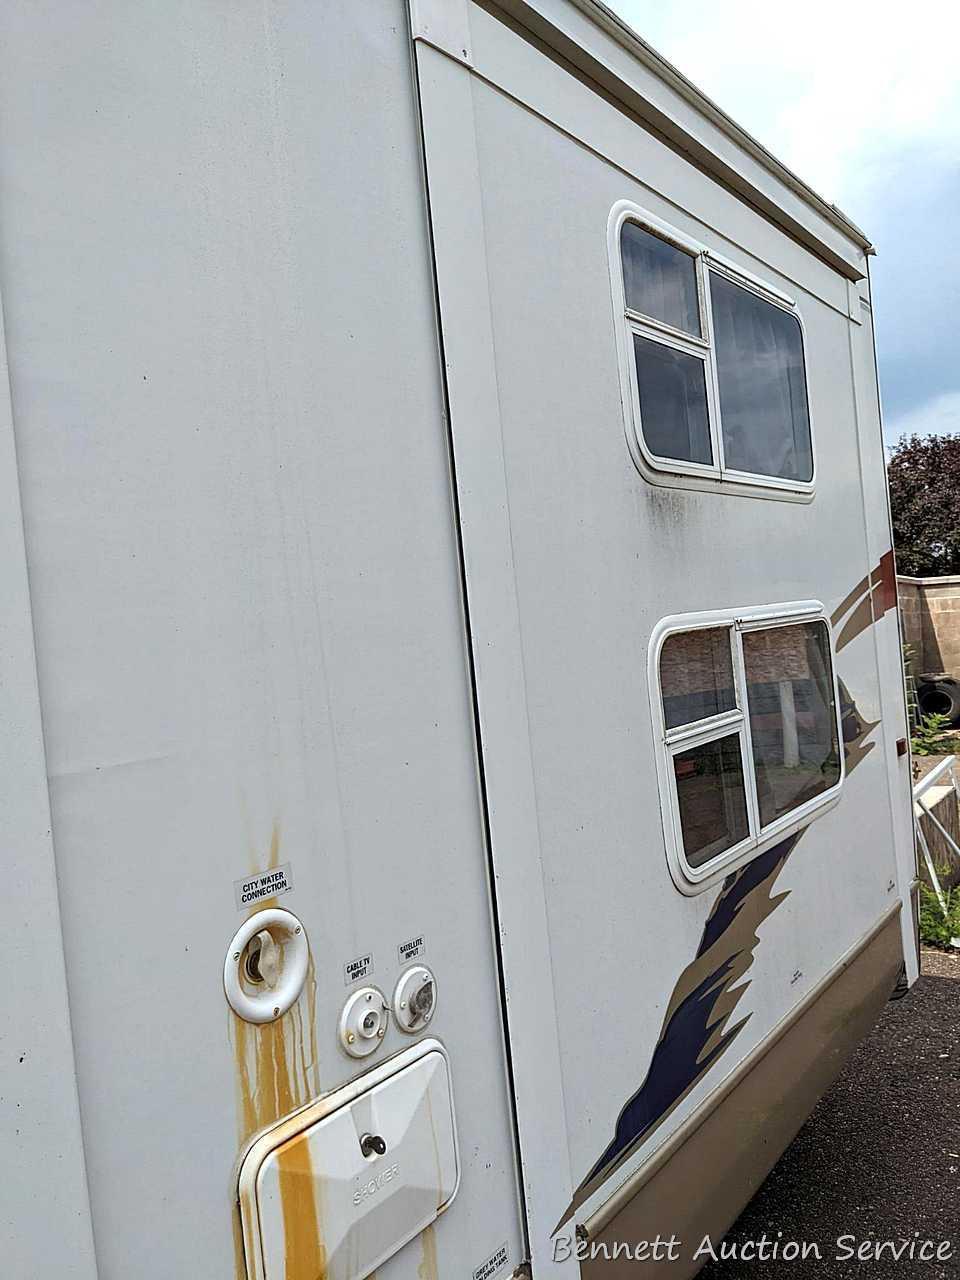 Jayco Eagle 314 BHDS slide-out camper has three beds, bathroom with shower...